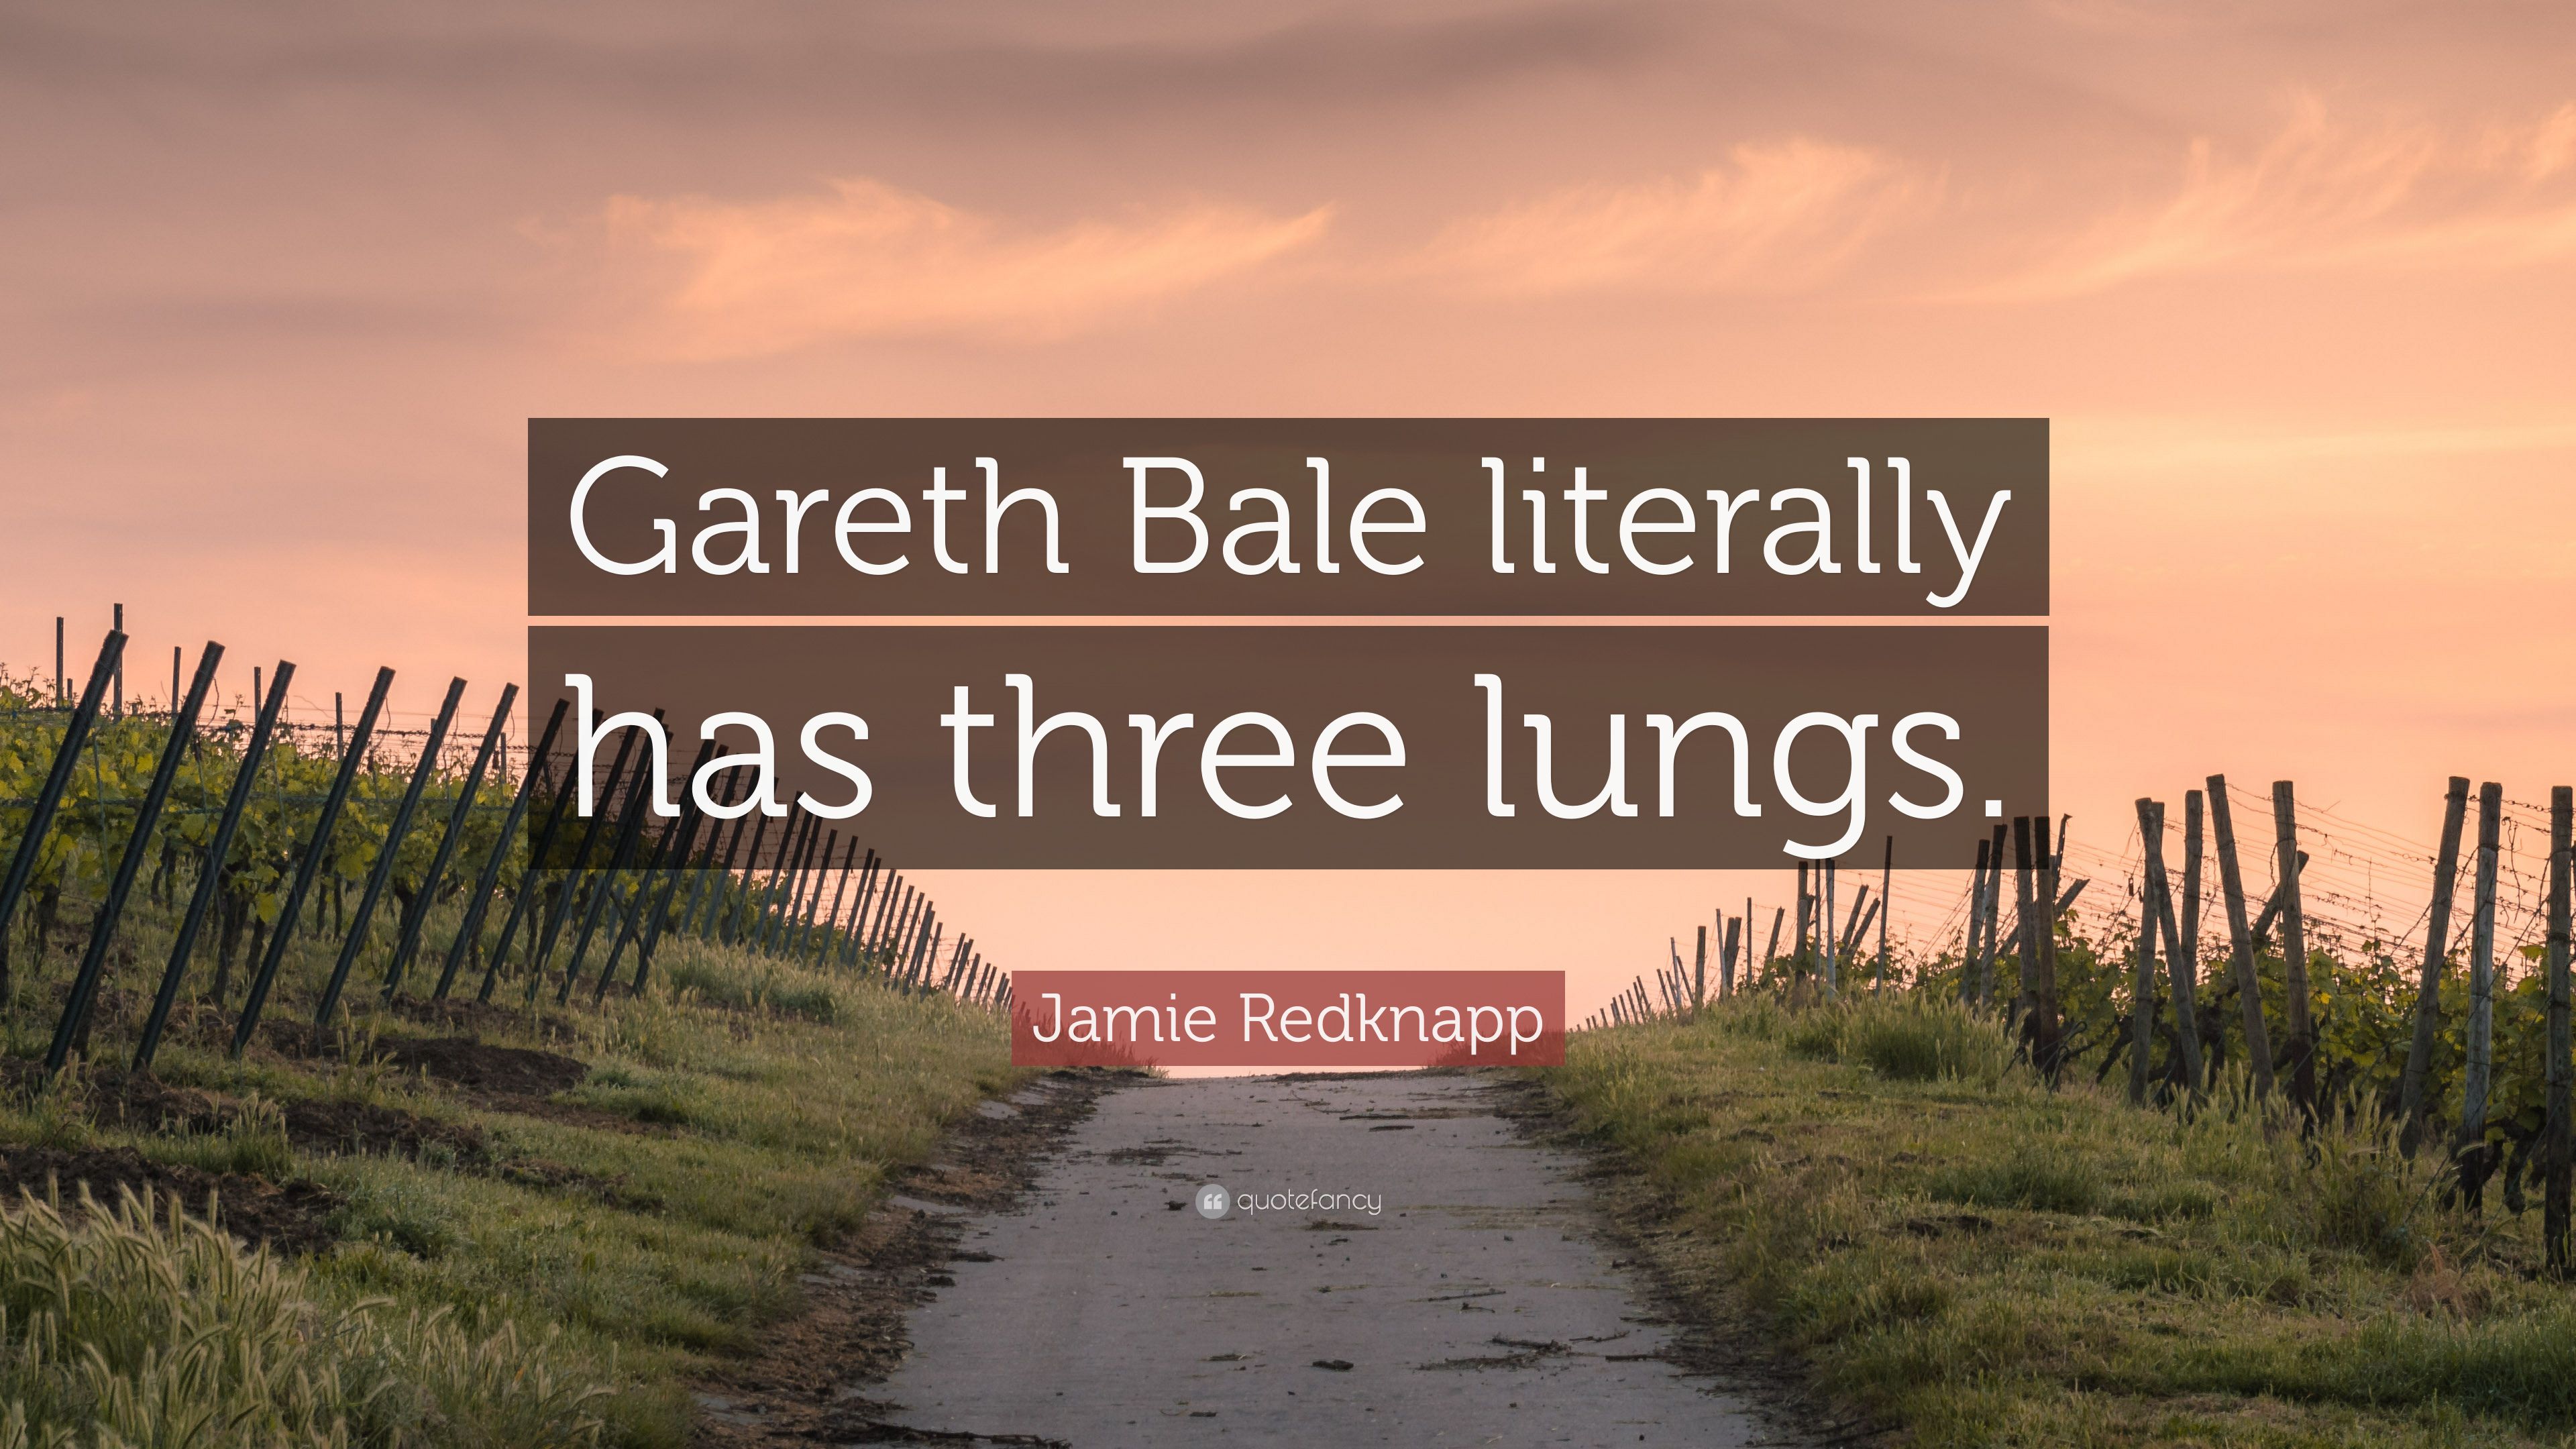 Jamie Redknapp Quote: “Gareth Bale literally has three lungs.” 7